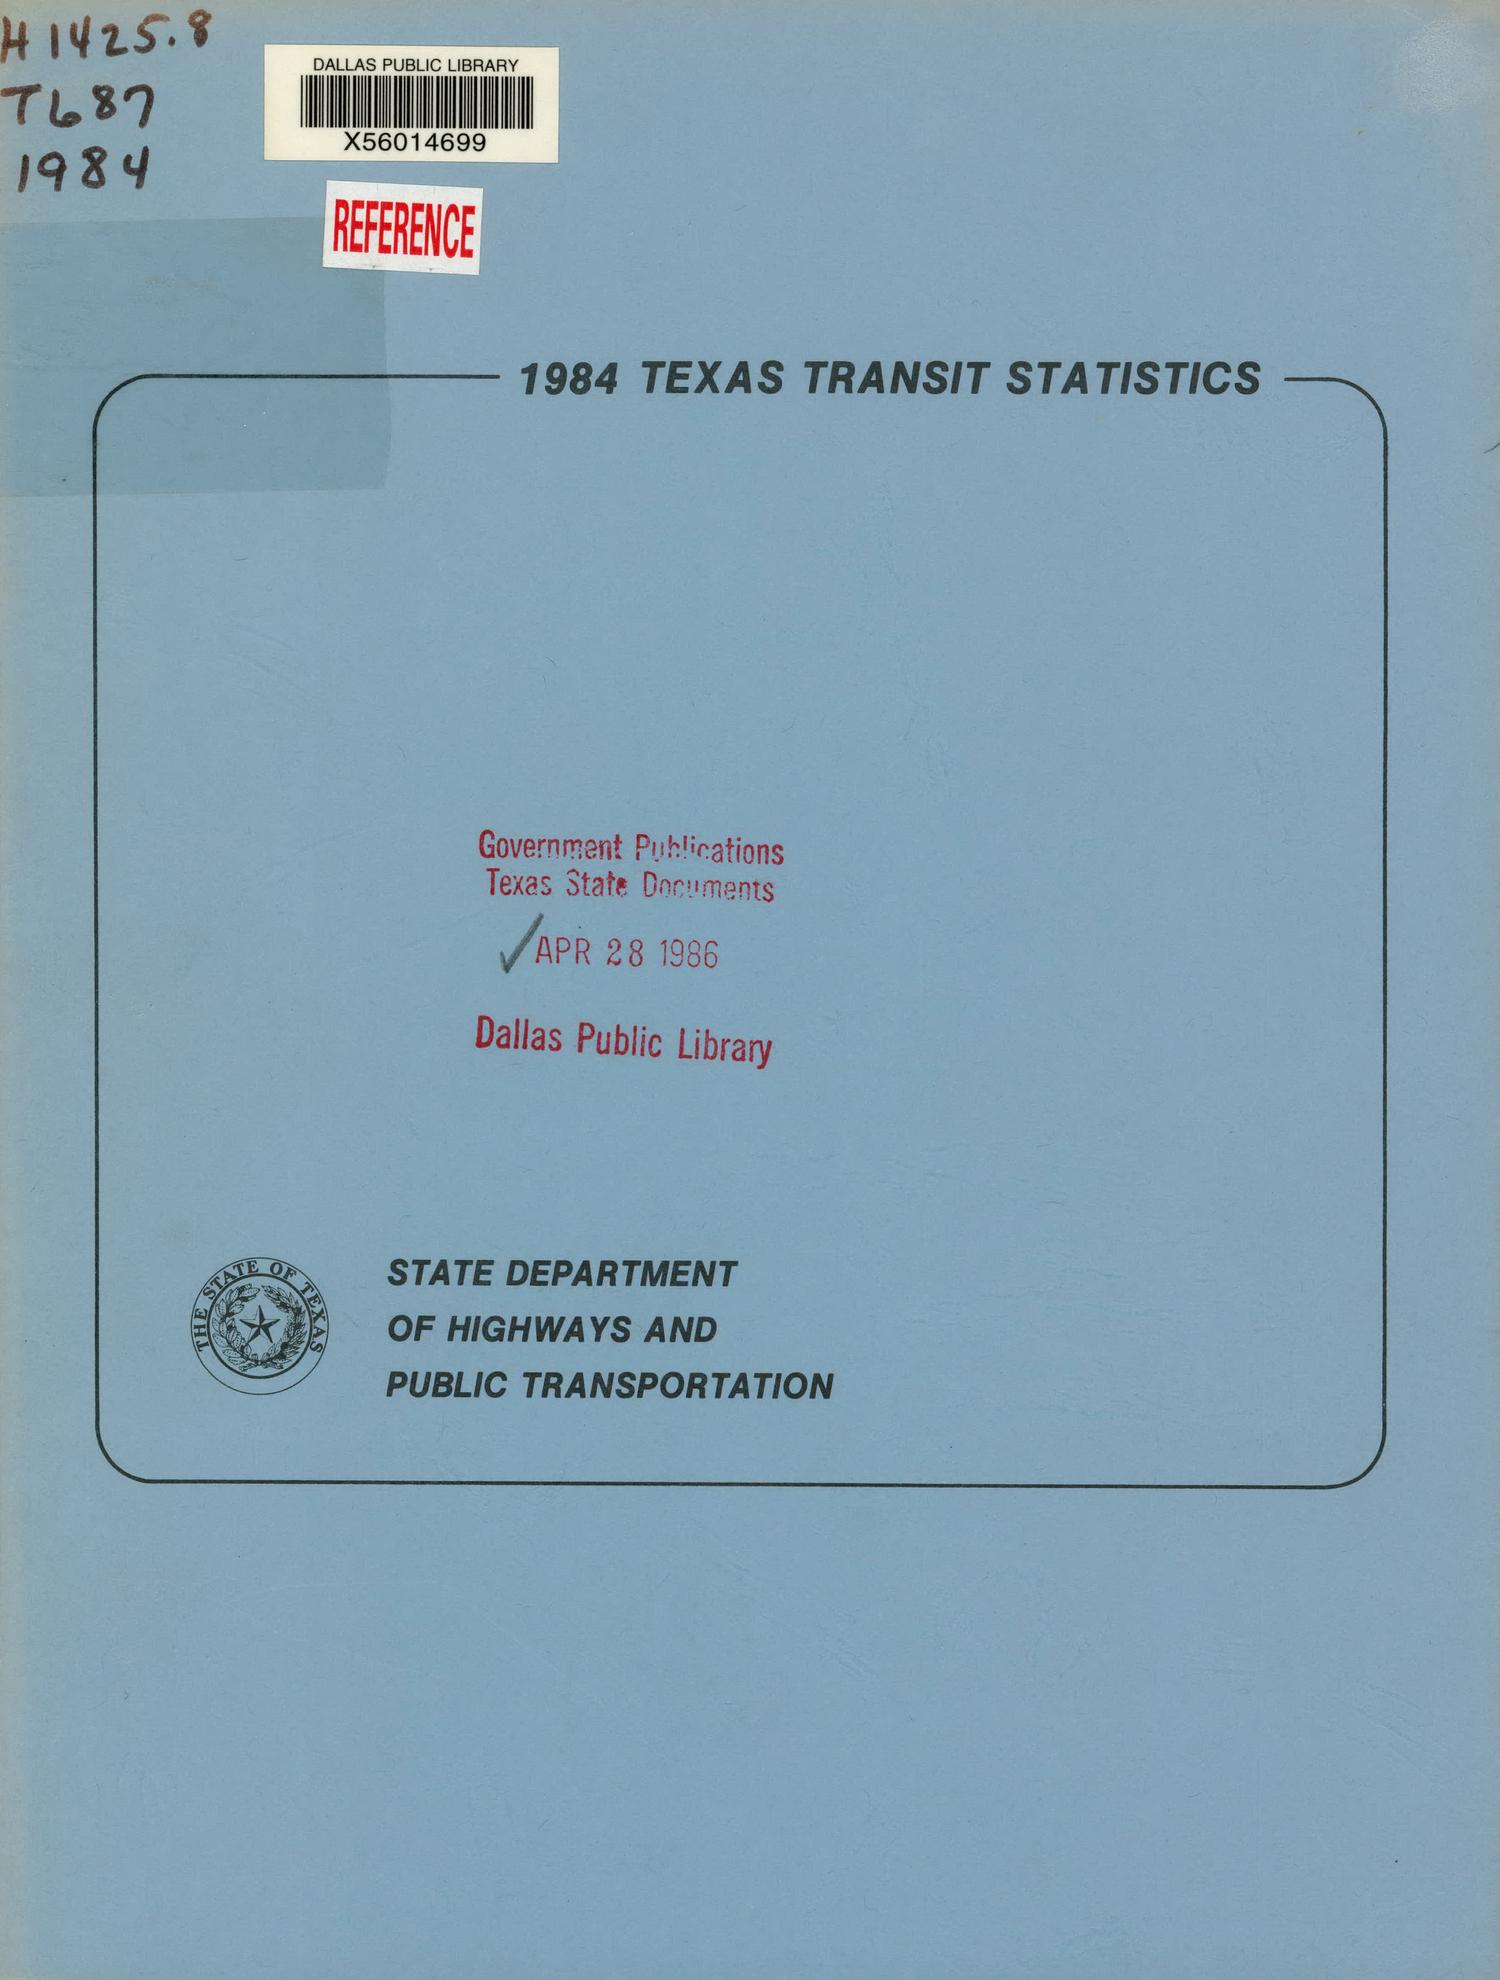 Texas Transit Statistics: 1984
                                                
                                                    FRONT COVER
                                                